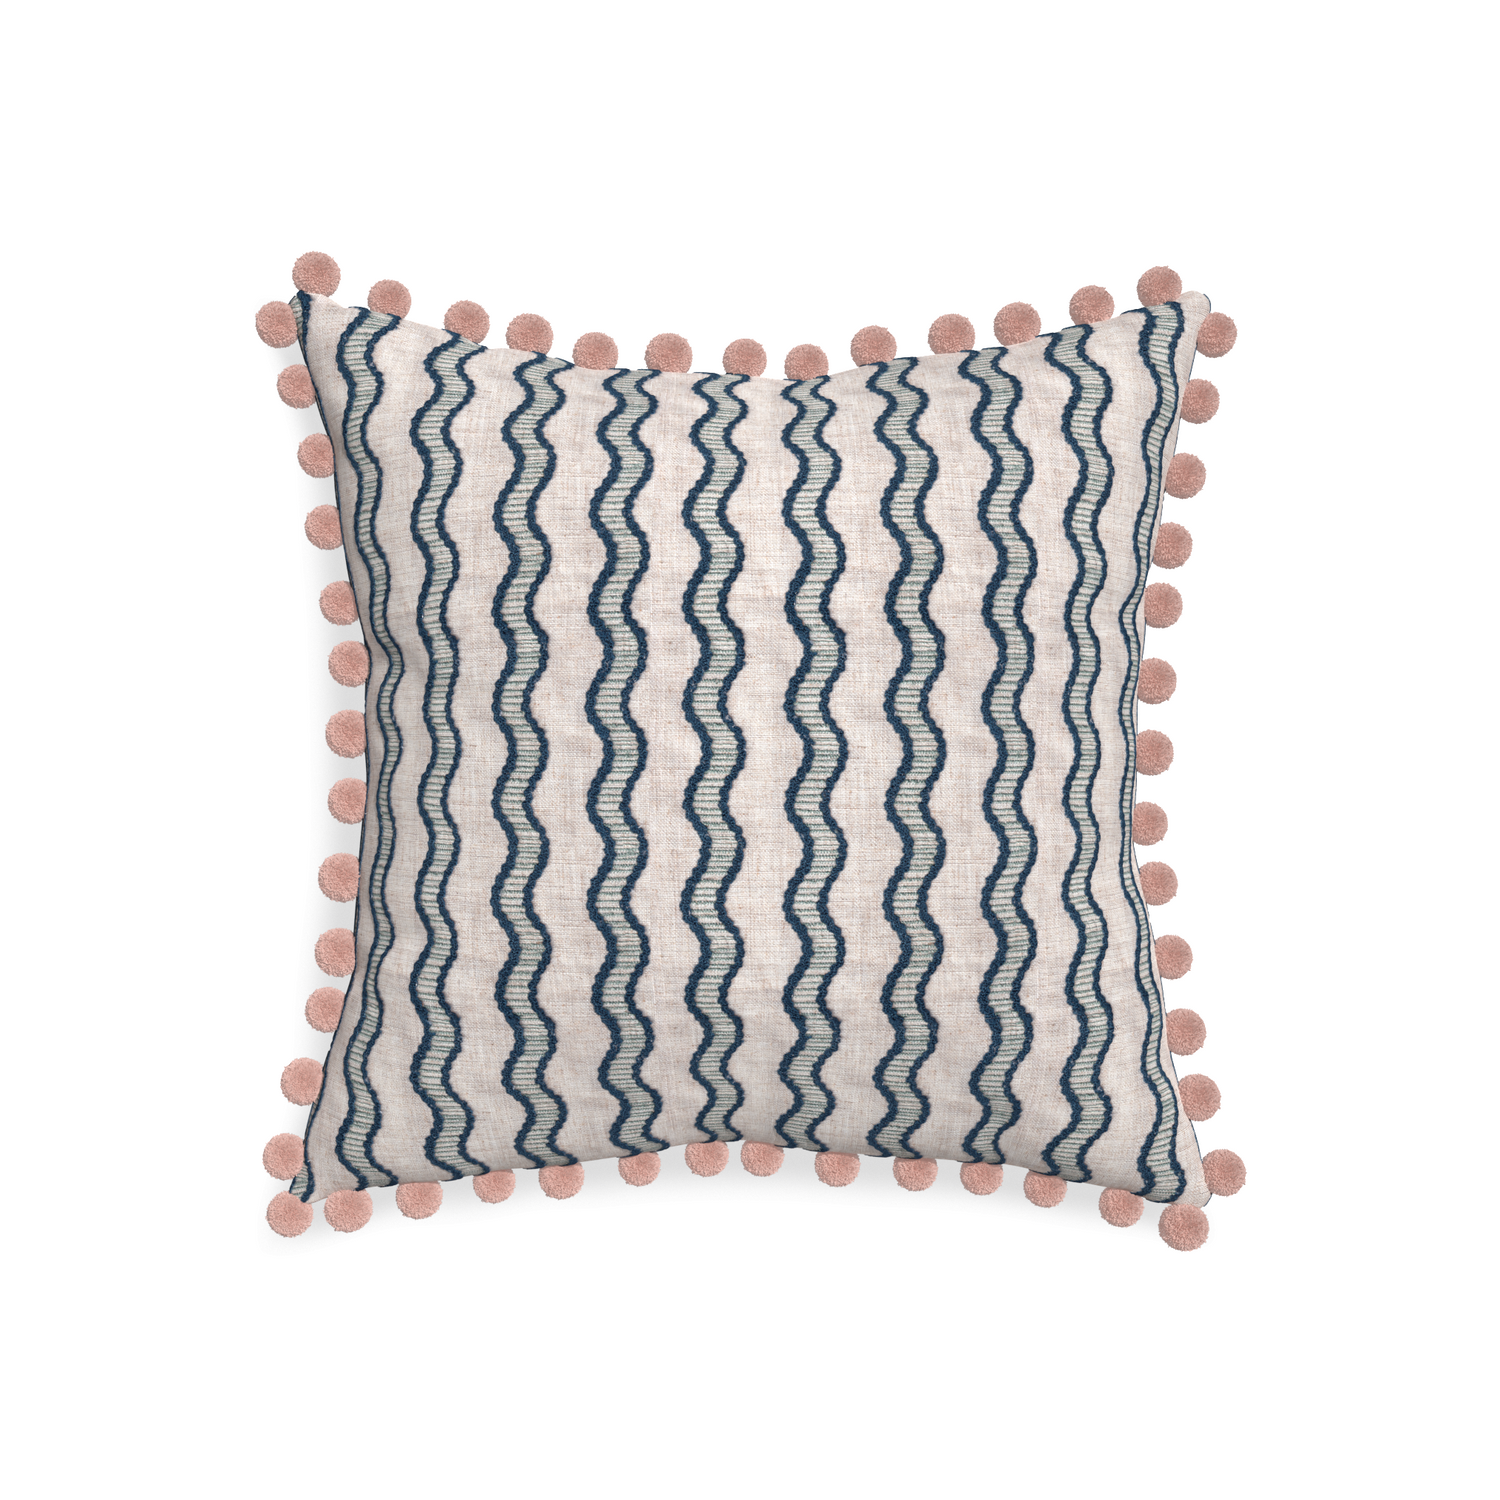 20-square beatrice custom embroidered wavepillow with rose pom pom on white background